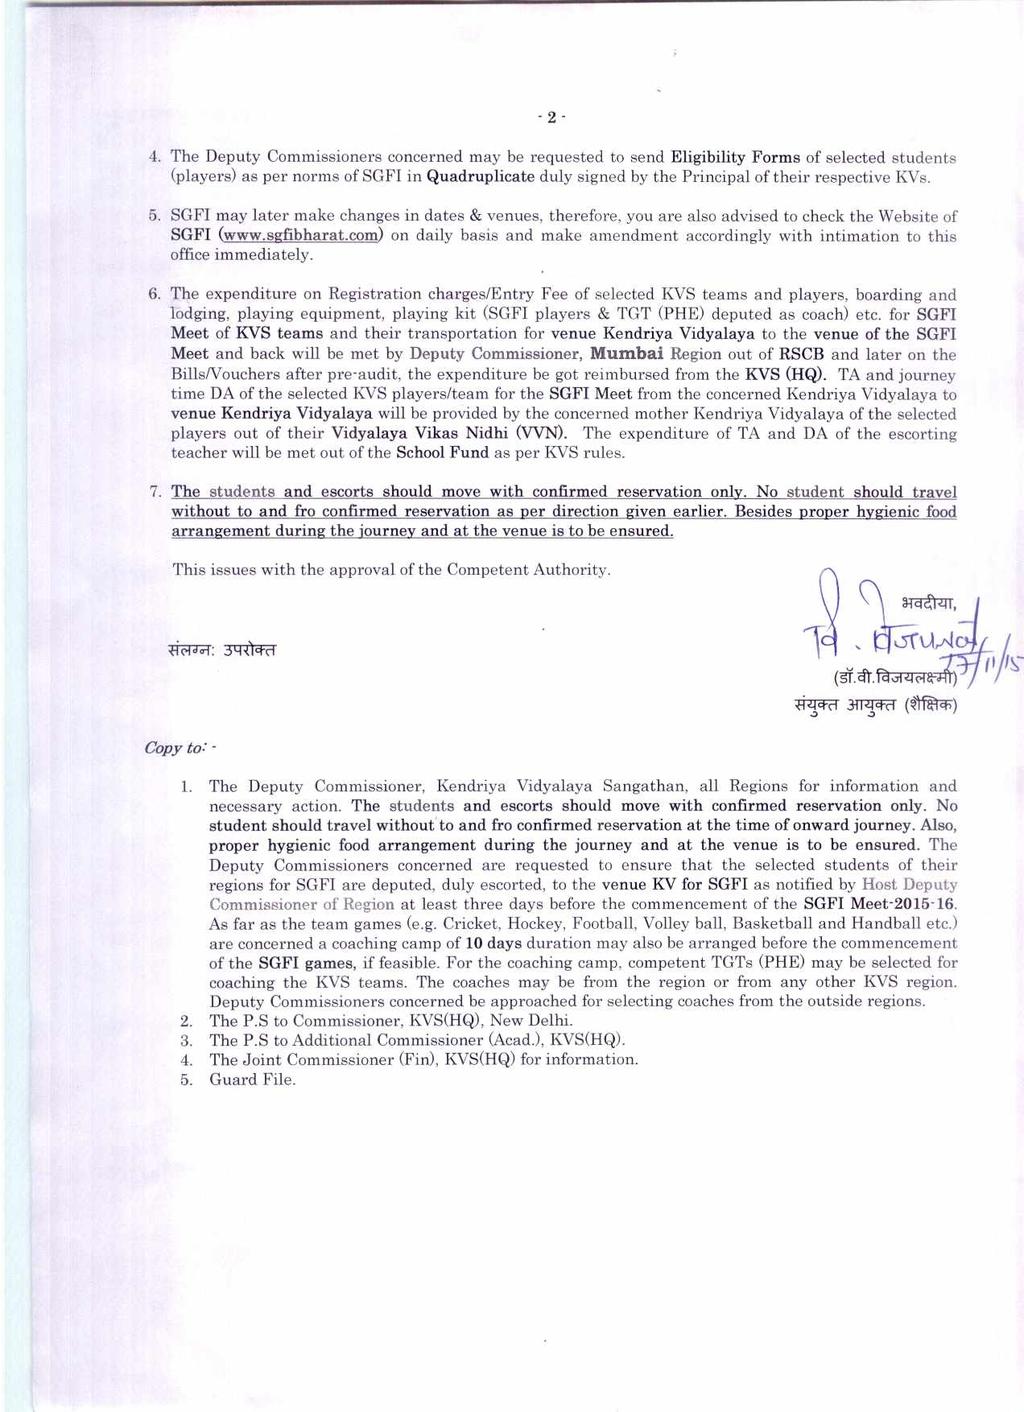 -2-4. The Deputy Commissioners concerned may be requested to send Eligibility Forms of selected students (players) as per norms of SGFI in Quadruplicate duly signed by the Principal of their